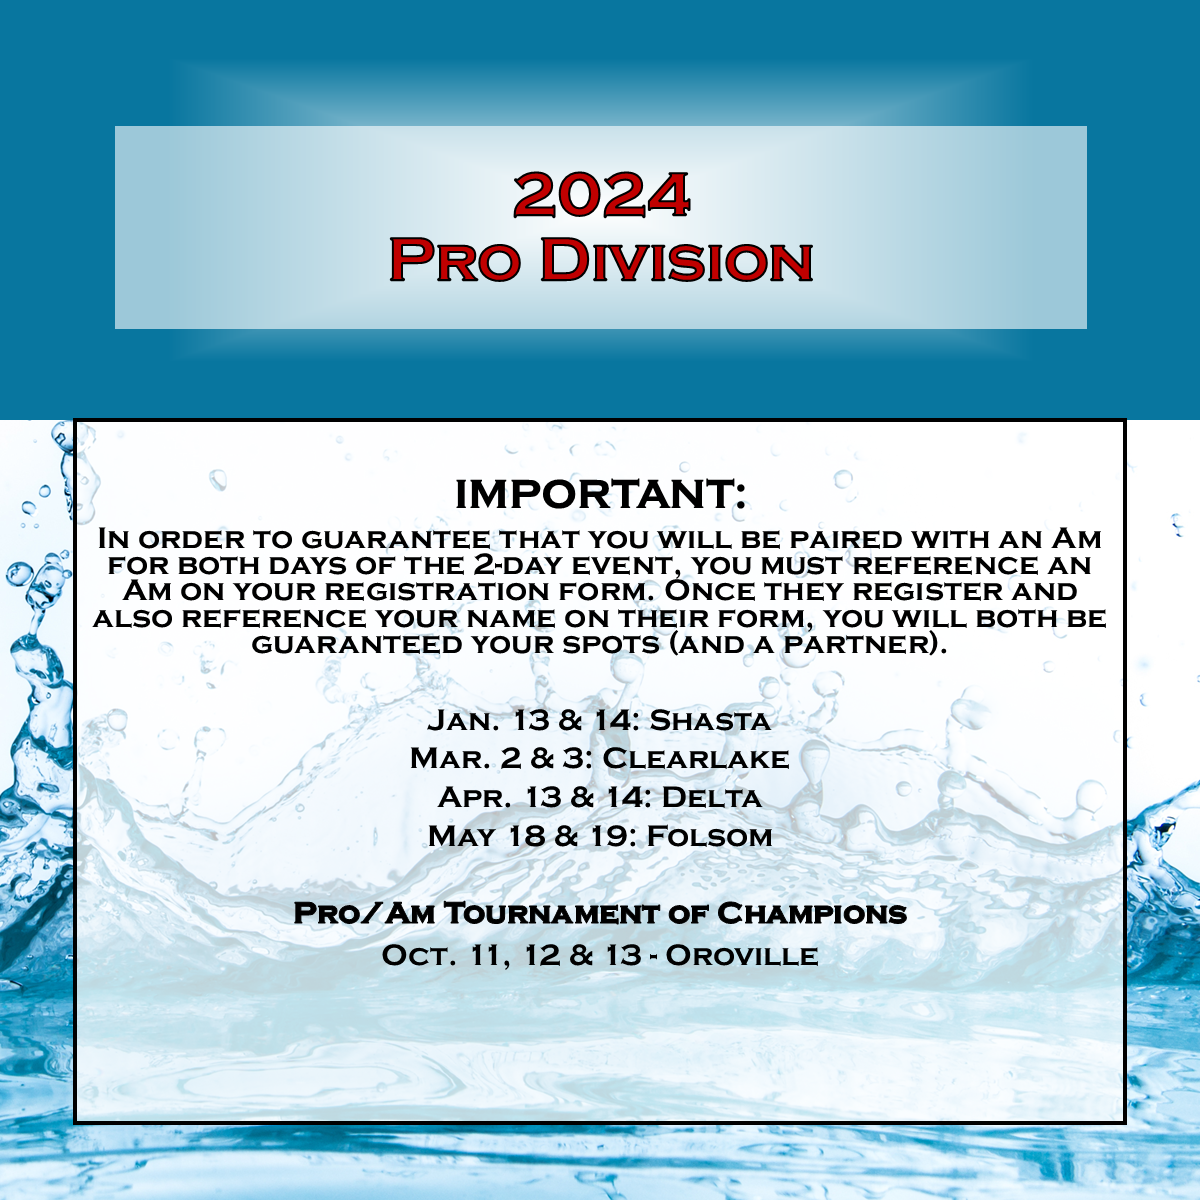 2024 Pro/Am Tournament of Champions (INVITATION ONLY): Pro Division Entry - Lake Oroville, CA Oct. 11-13, 2024